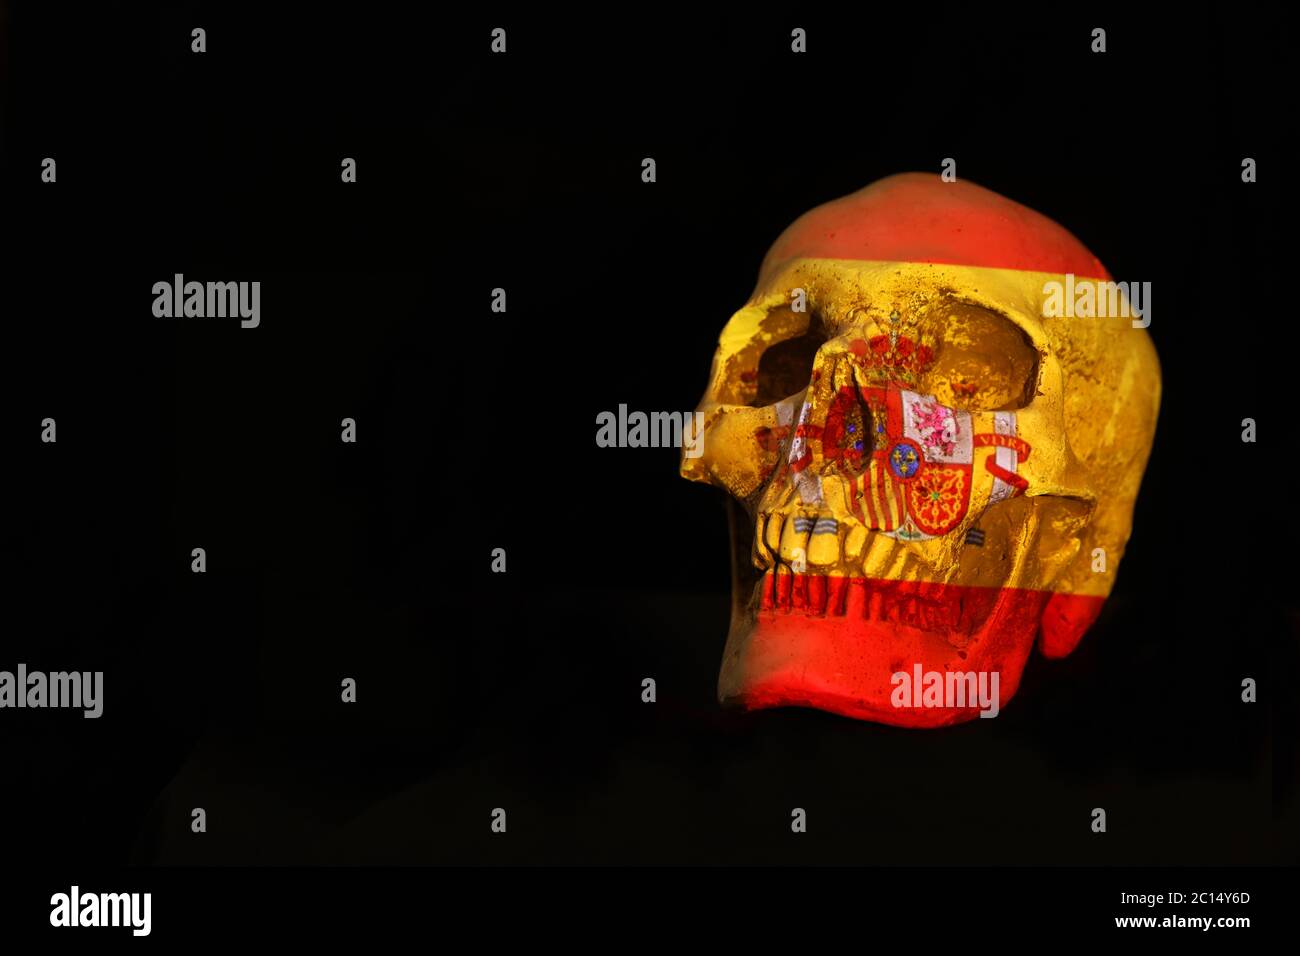 Spanish national flag projected over an isolated skull set against a plain black background Stock Photo